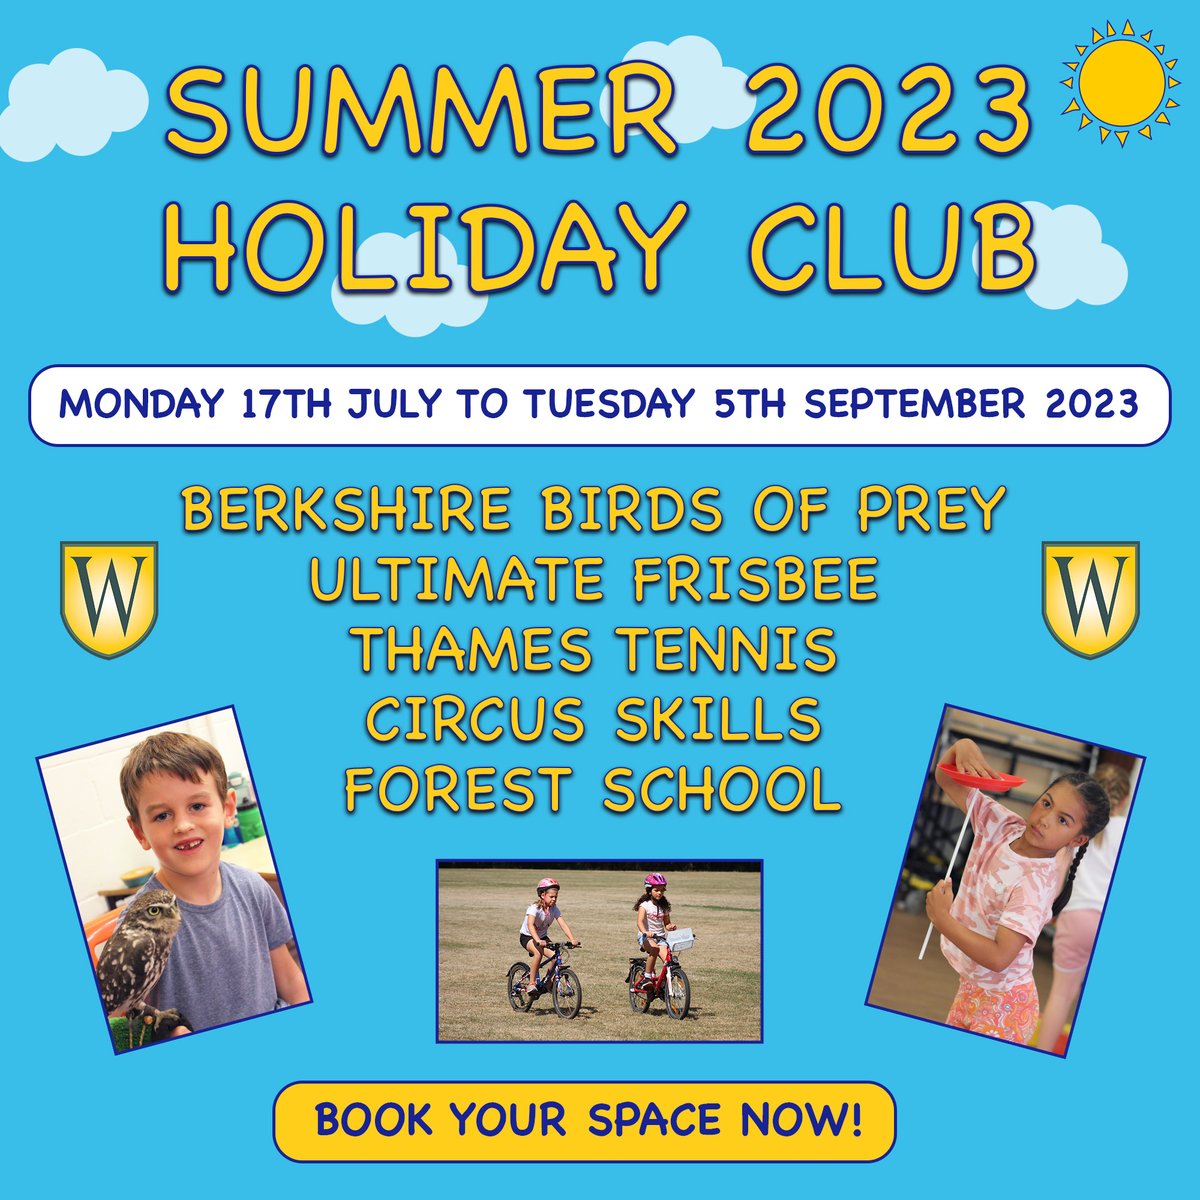 Bookings are now OPEN for our Summer Holiday Club. We have lots of exciting activities planned to keep your children entertained. Places fill quickly, so book early to avoid disappointment. Book here: tinyurl.com/46tn2kd7
#SummerHolidayClub #WaverleyHolidayClub #Summer2023